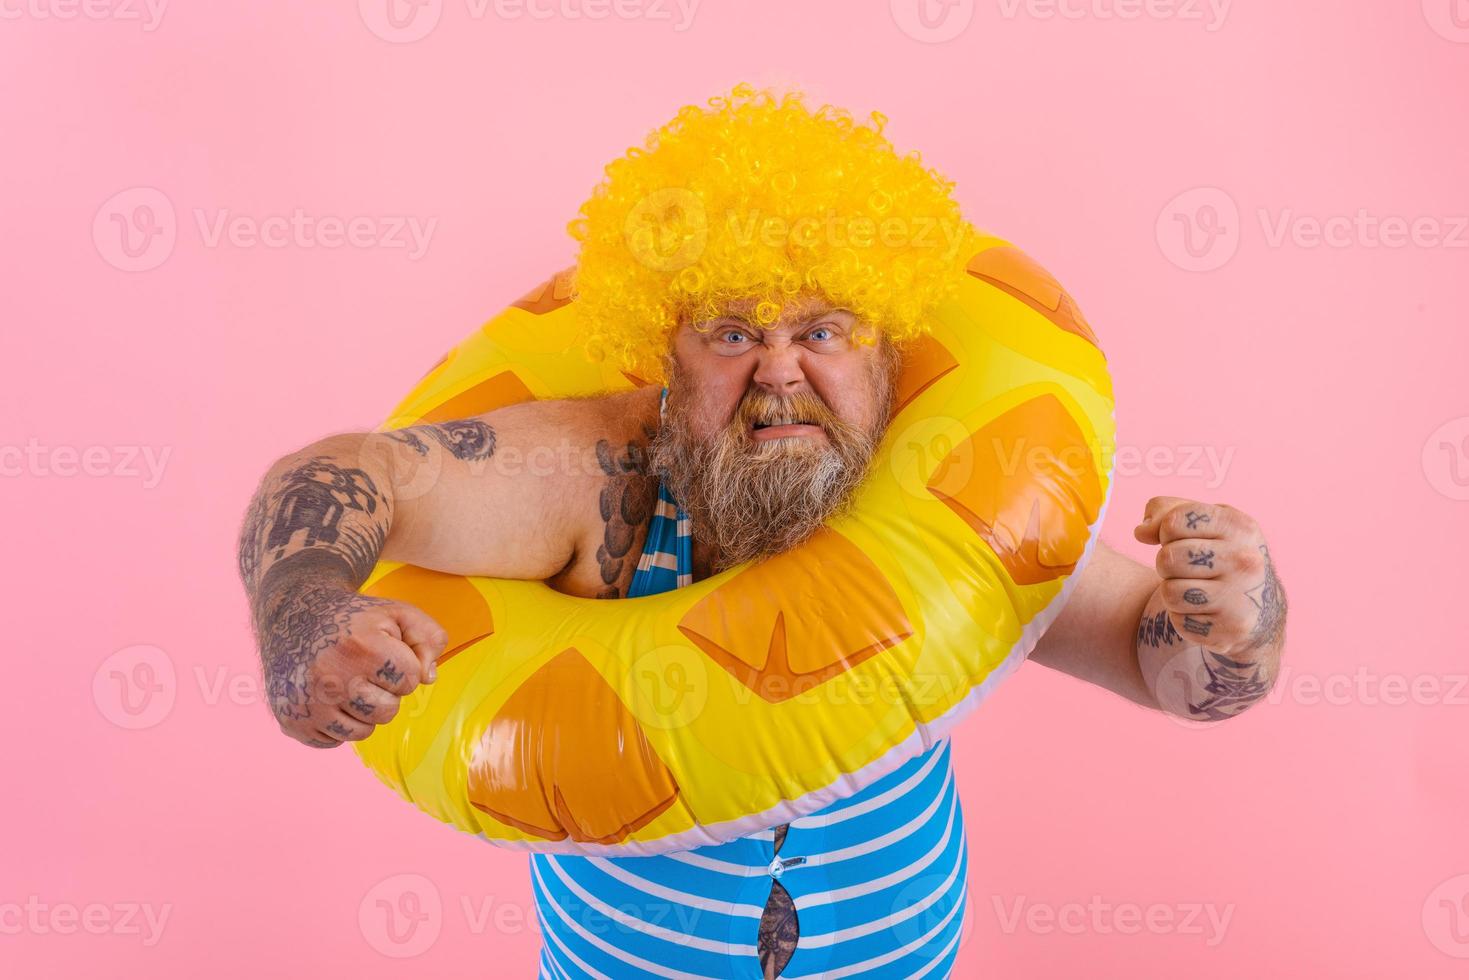 Fat angry man with wig in head is ready to swim with a donut lifesaver photo